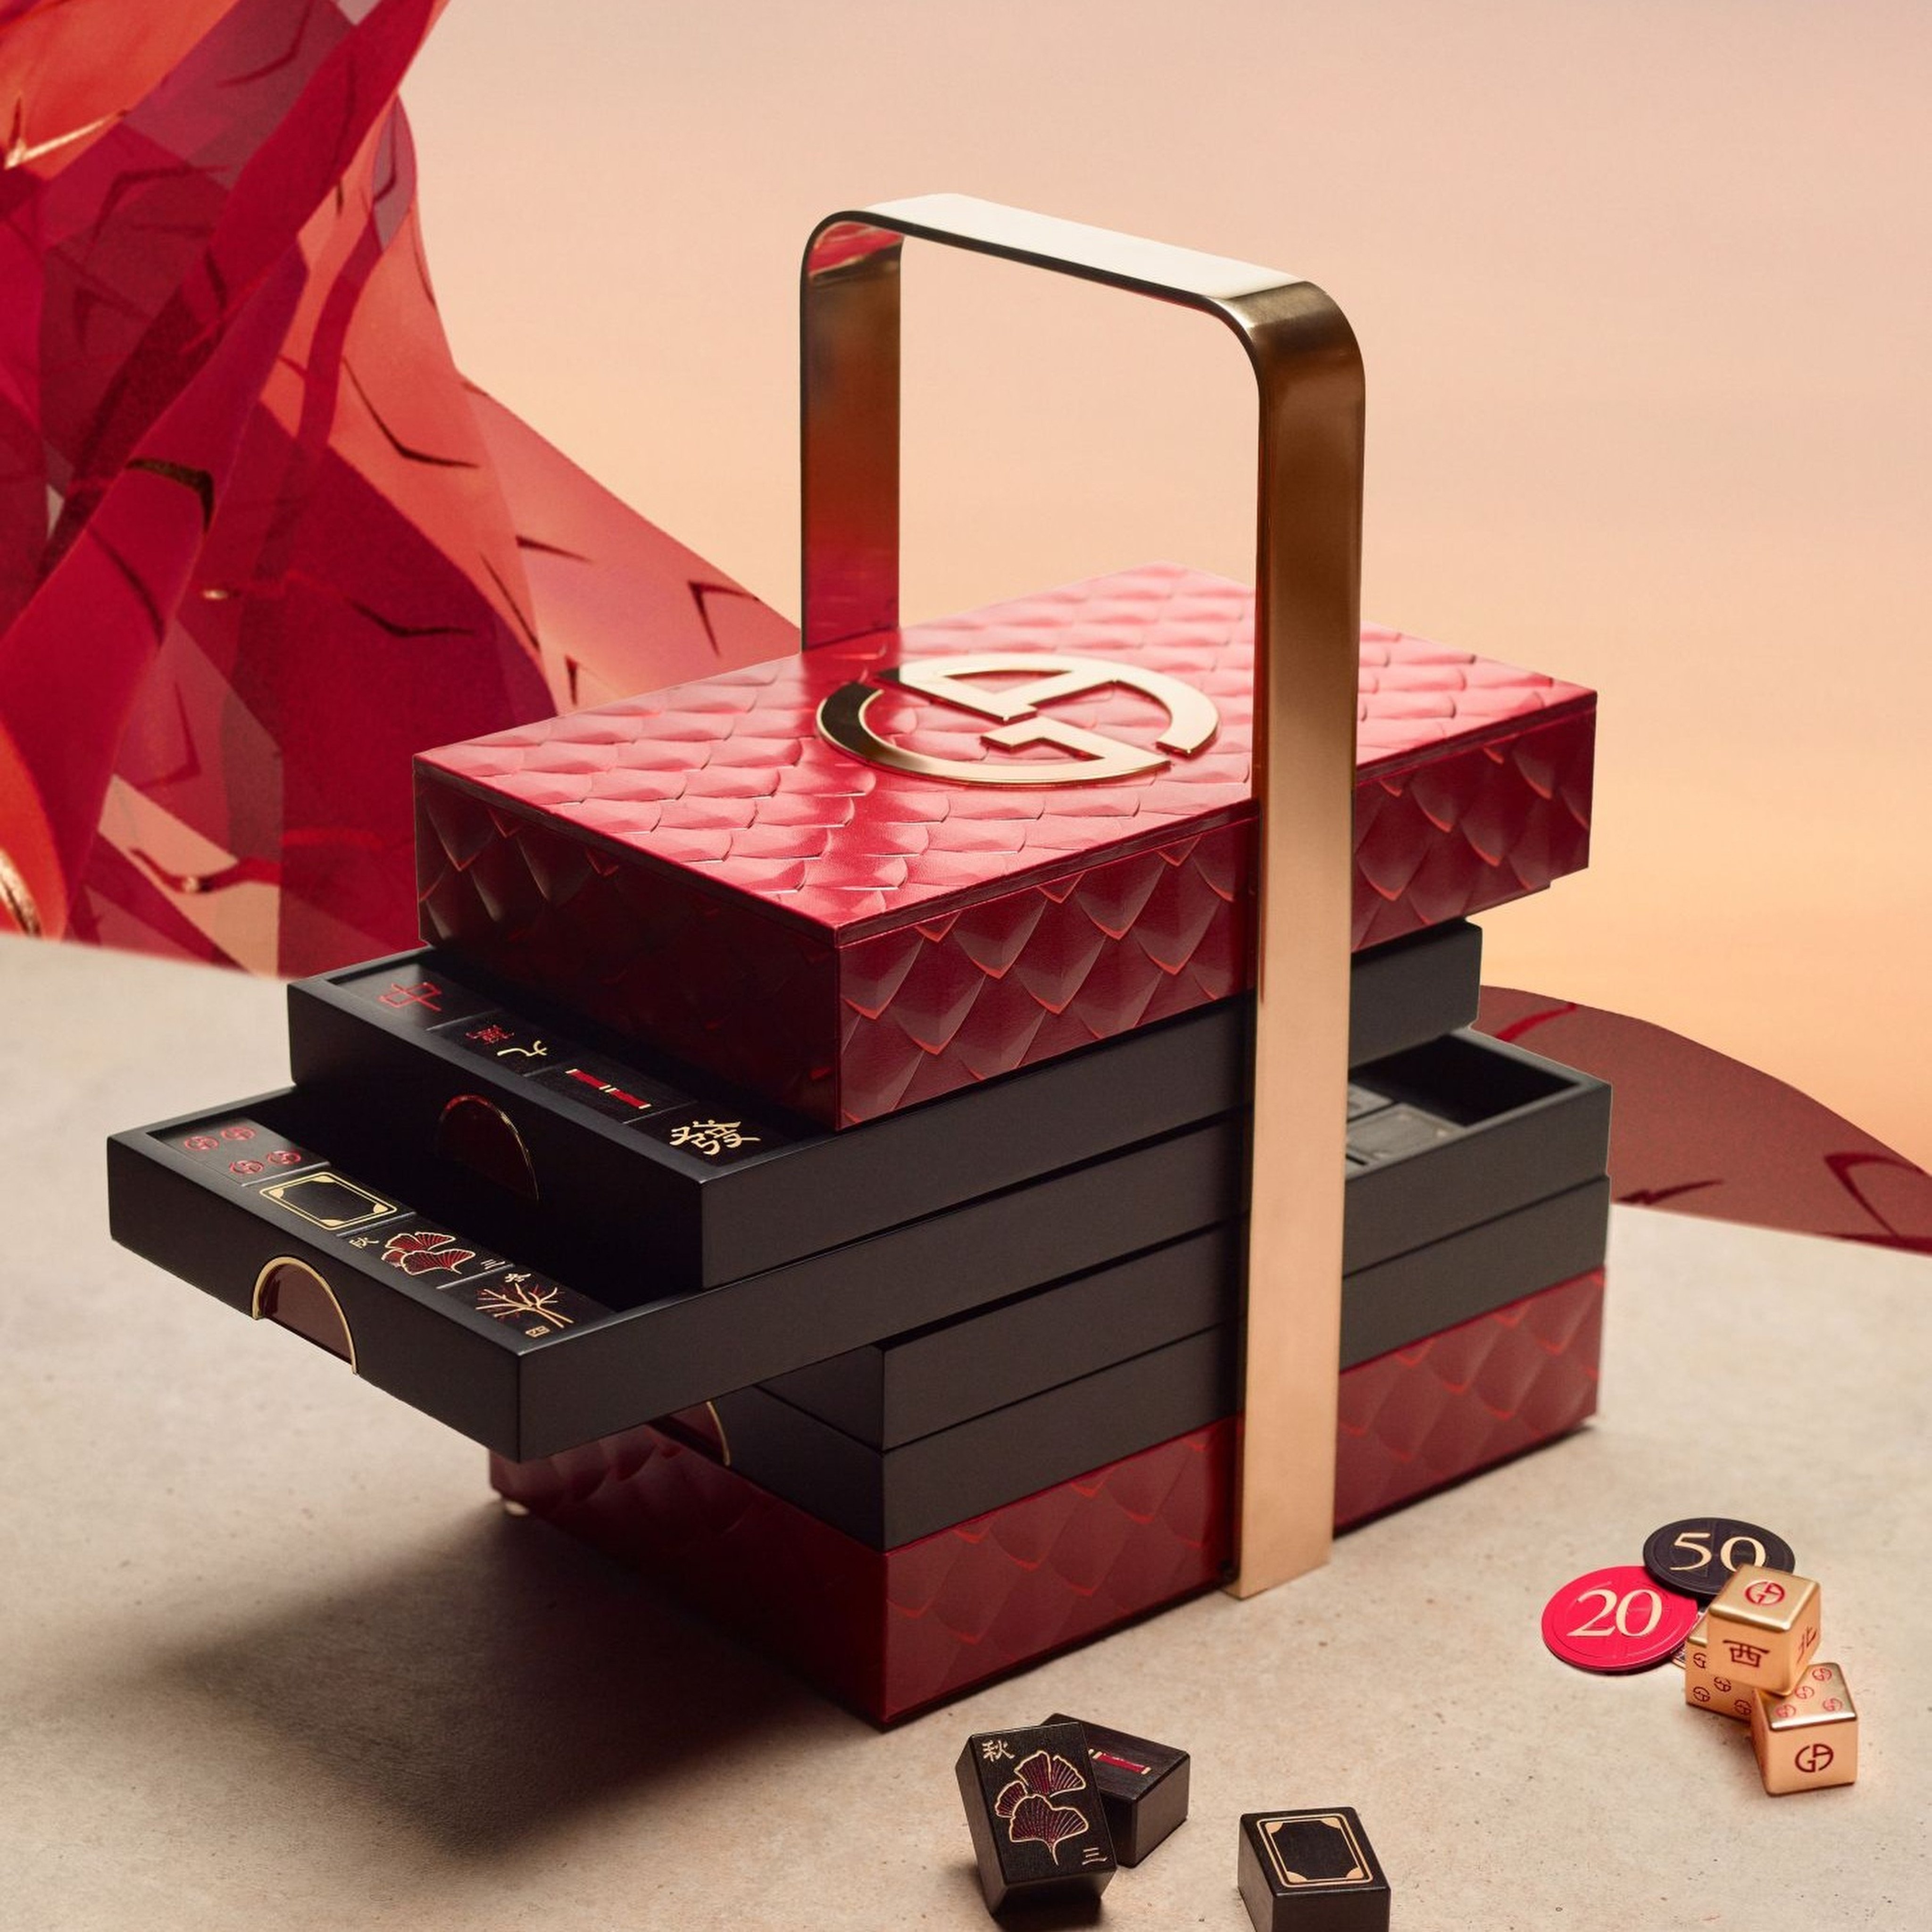 Amani Beauty offers limited edition cushion case and mahjong sets for customers to celebrate the Year of the Dragon. HANDOUT PHOTO